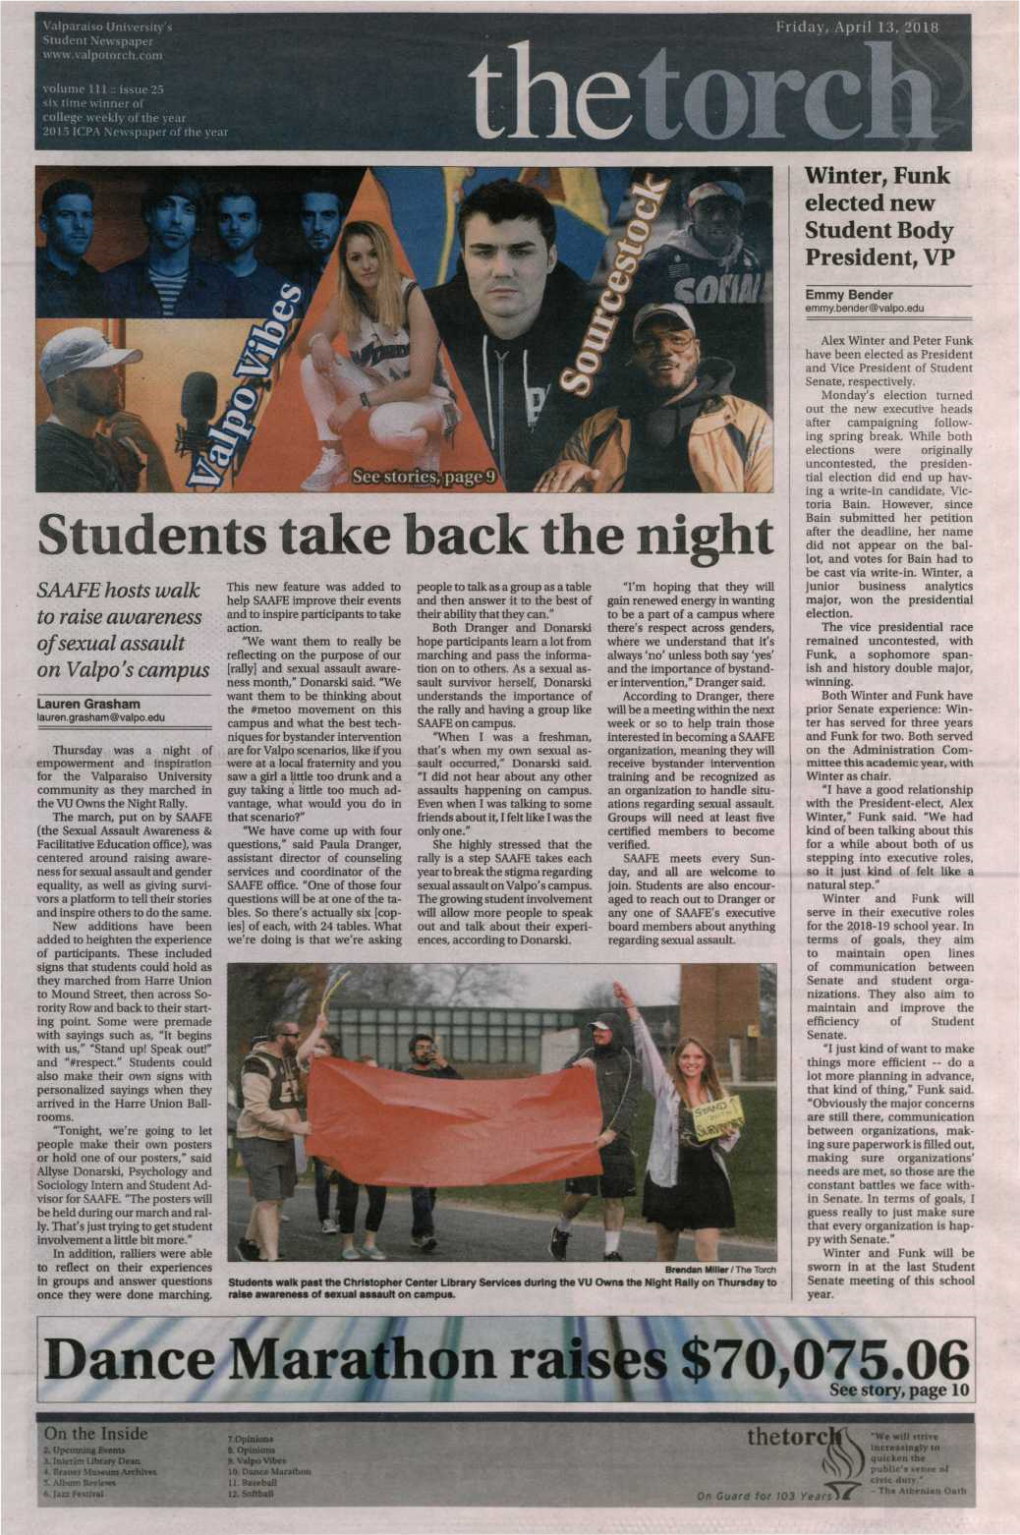 Students Take Back the Night Lot, and Votes for Bain Had to Be Cast Via Write-In